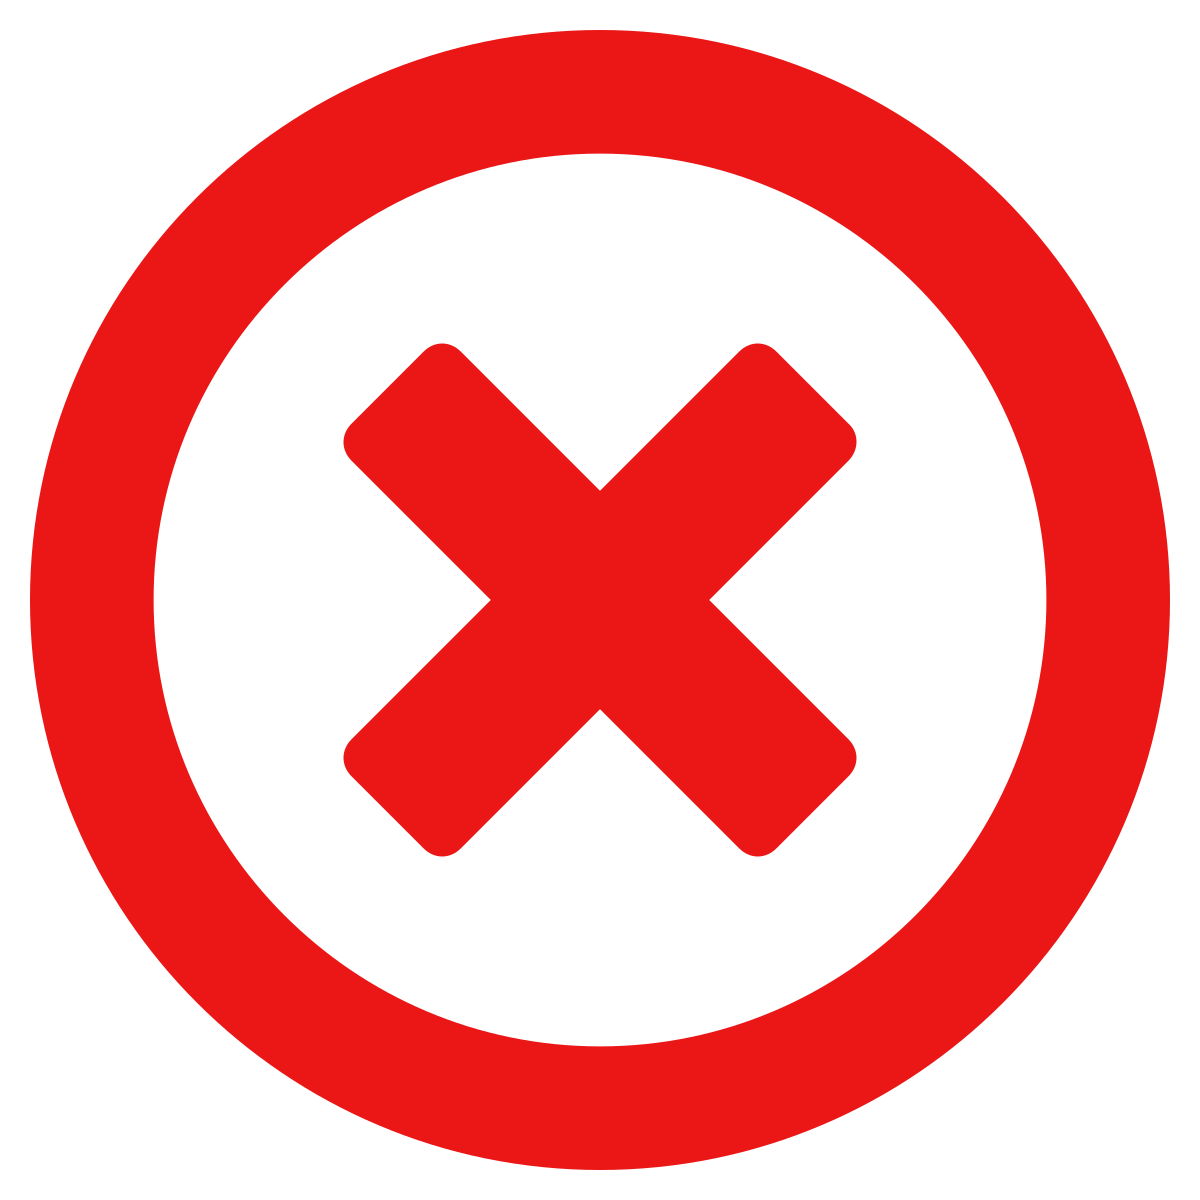 A red x contained by a red circle